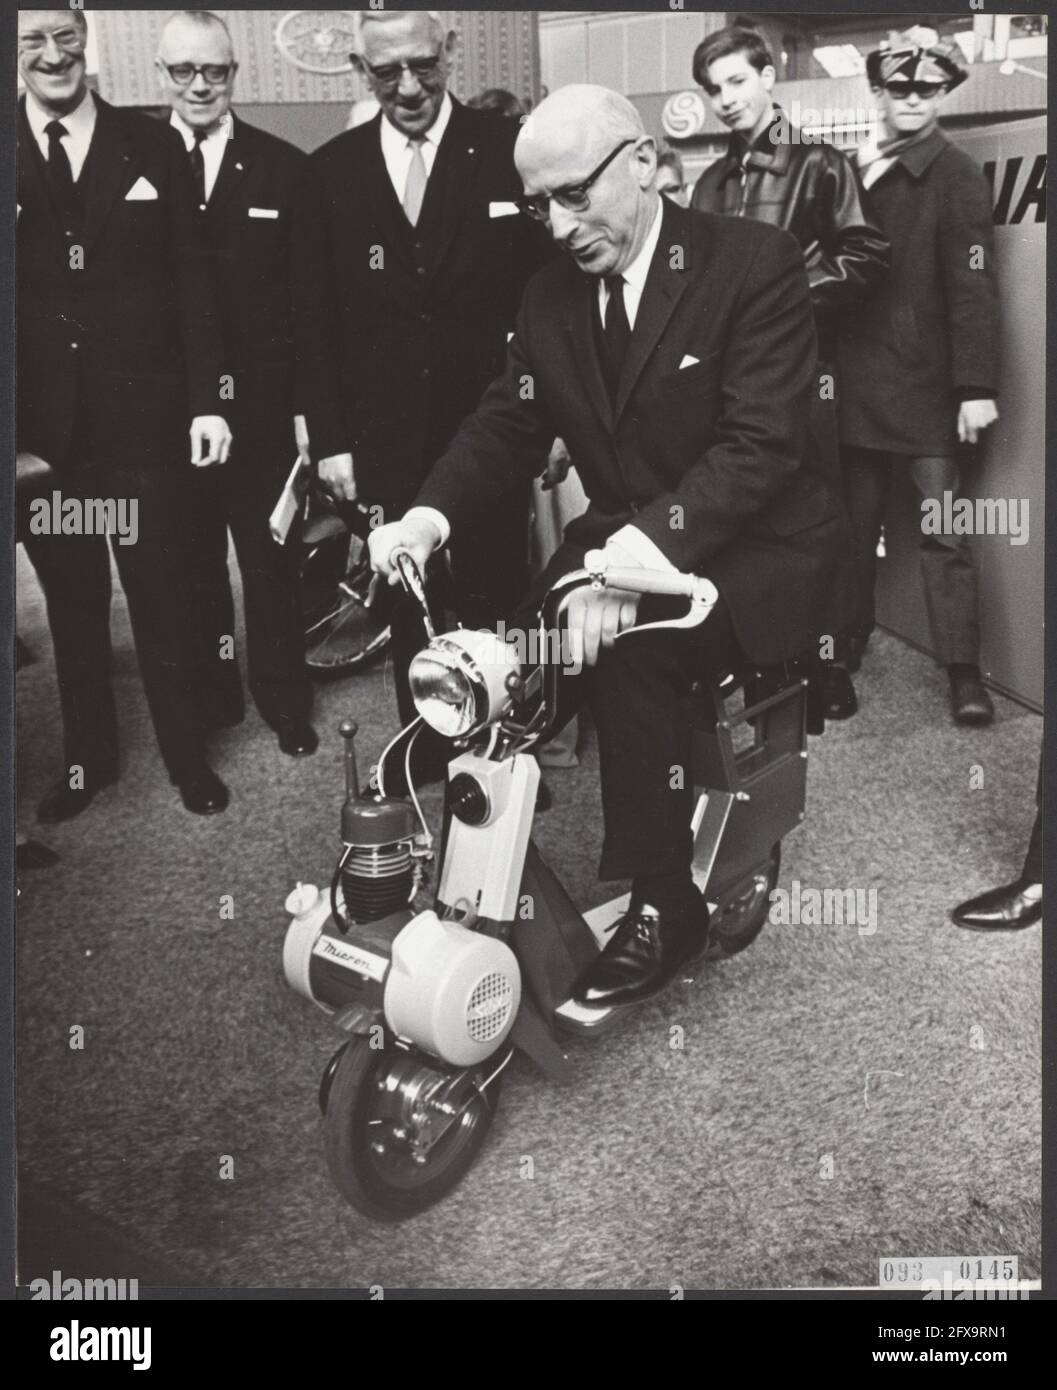 Mayor Samkalden showed great interest in the mini scooter exhibited at the 56th RAI two-wheeler exhibition, which was officially opened by him, February 26, 1968, mayors, openings, exhibitions, tscooters, The Netherlands, 20th century press agency photo, news to remember, documentary, historic photography 1945-1990, visual stories, human history of the Twentieth Century, capturing moments in time Stock Photo